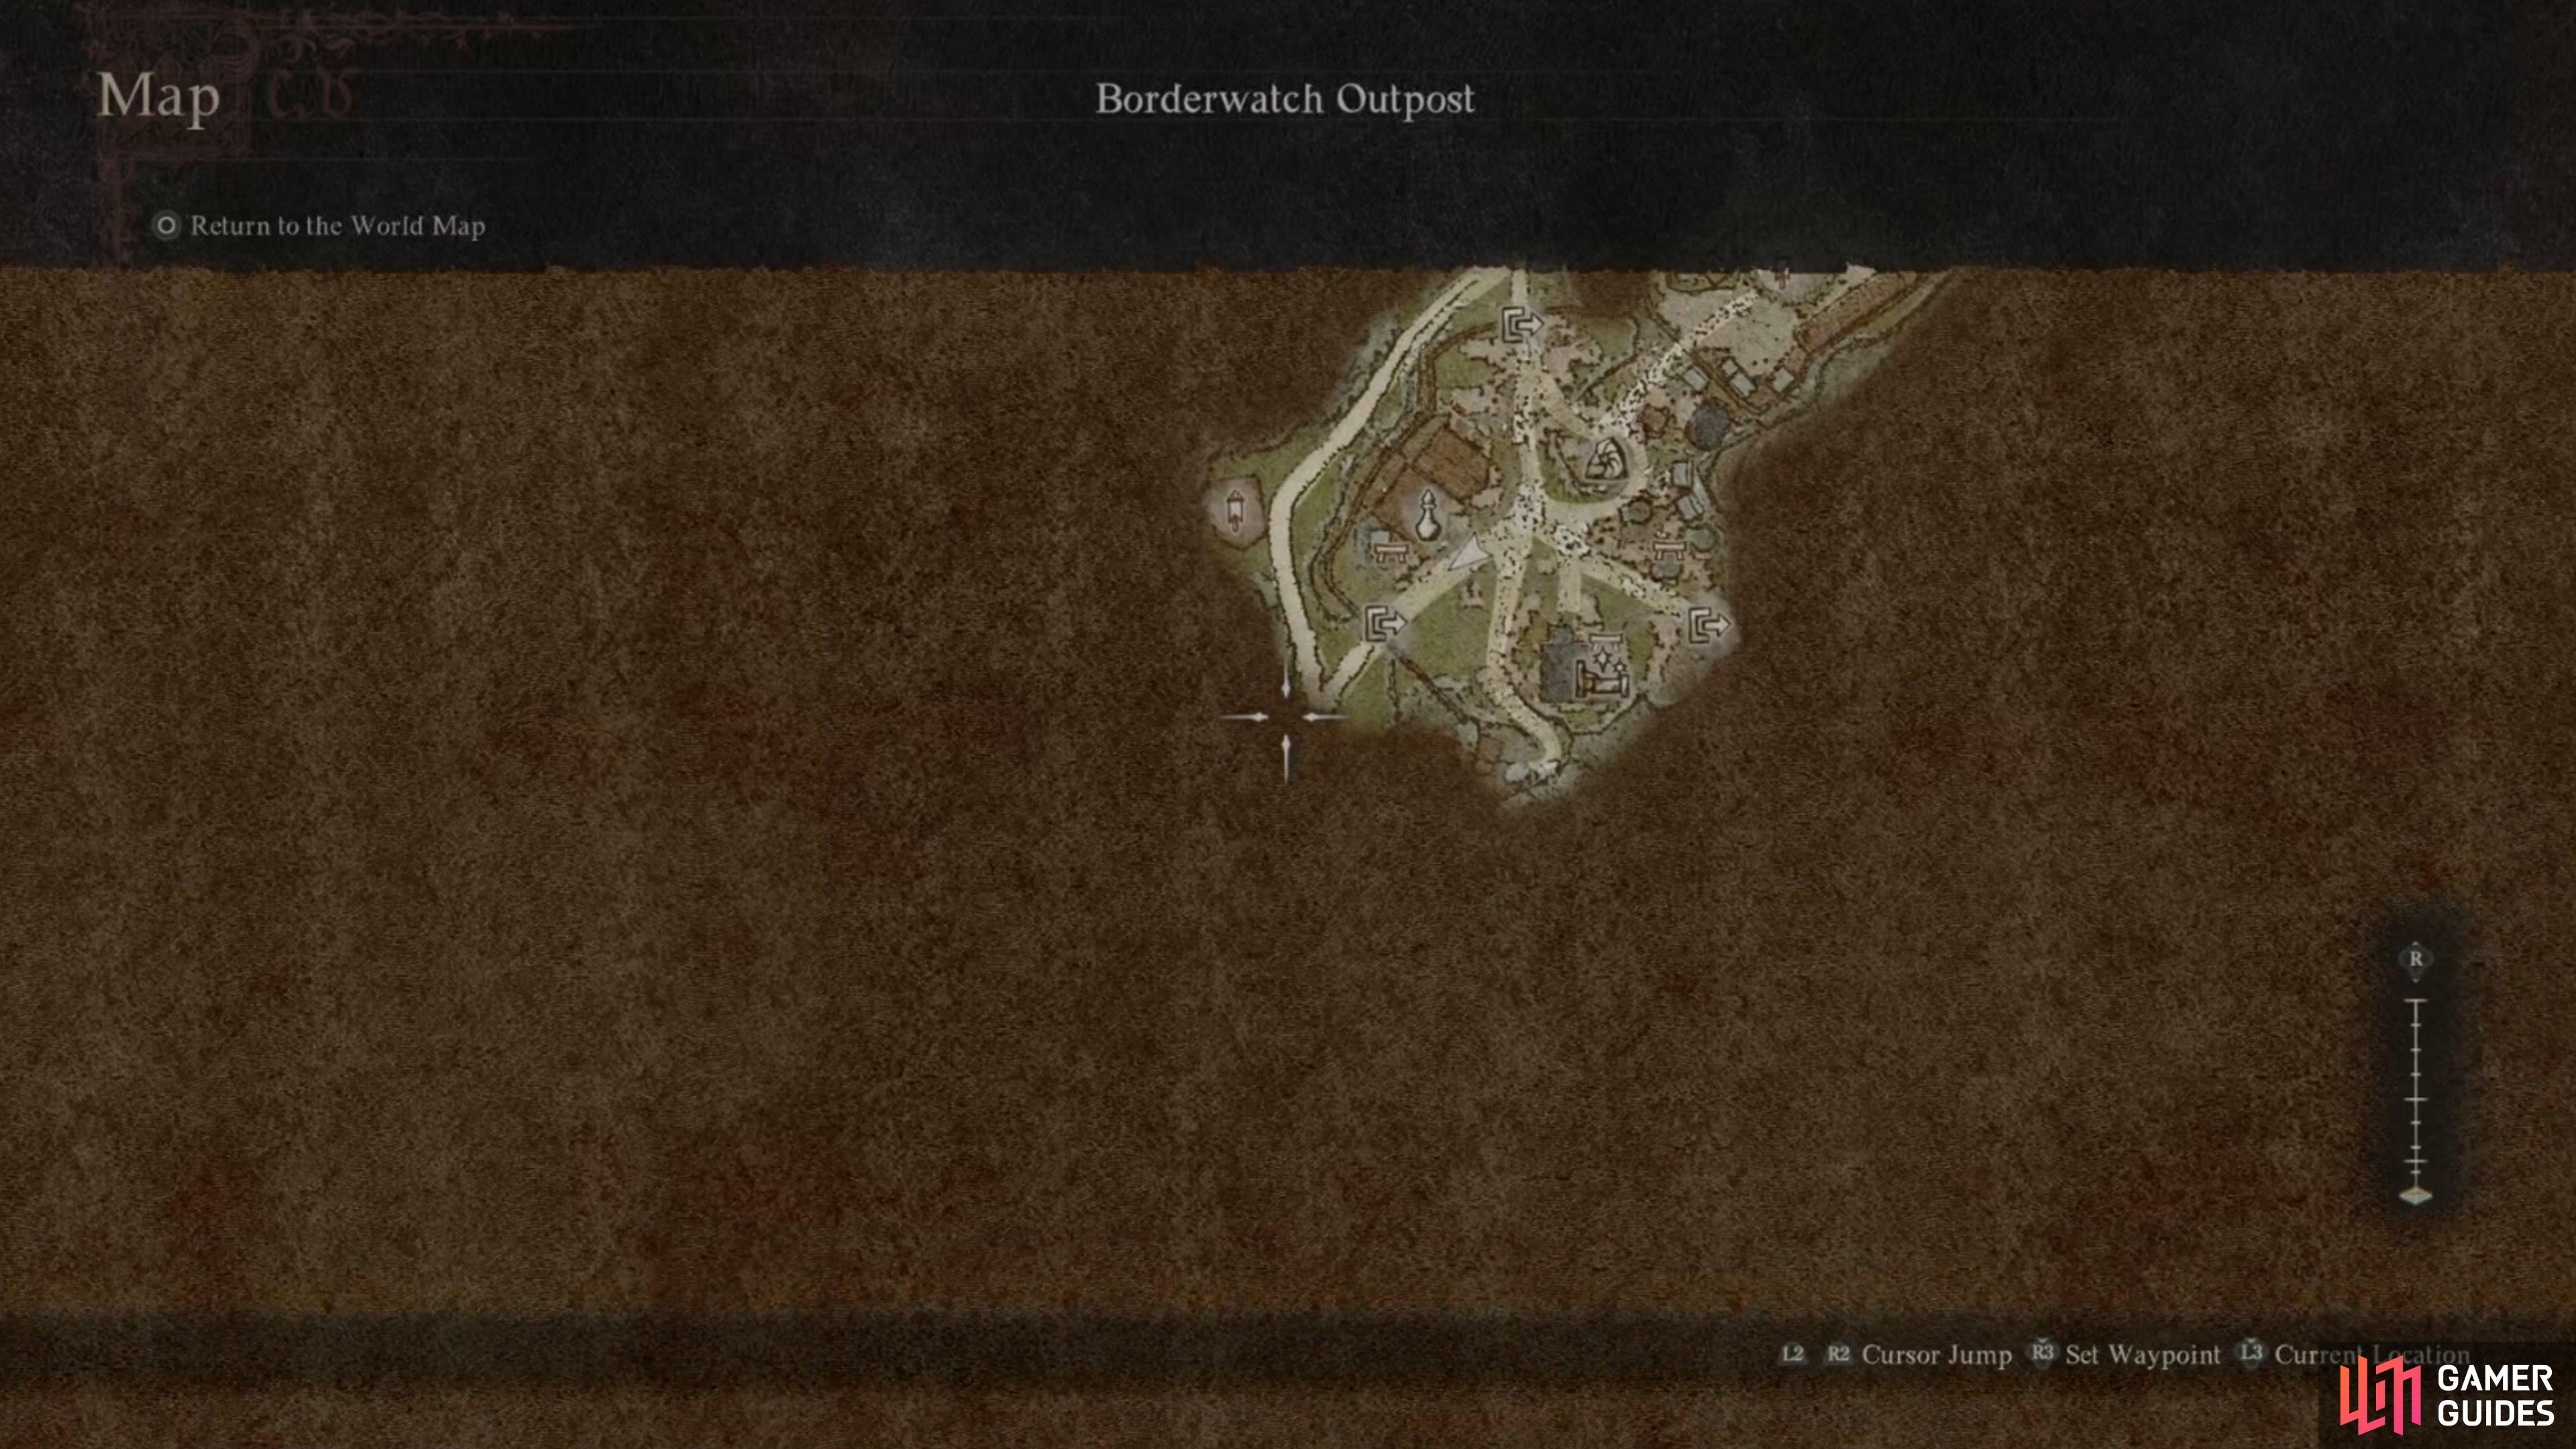 Head south from the Borderwatch Outpost to continue through the main questline.